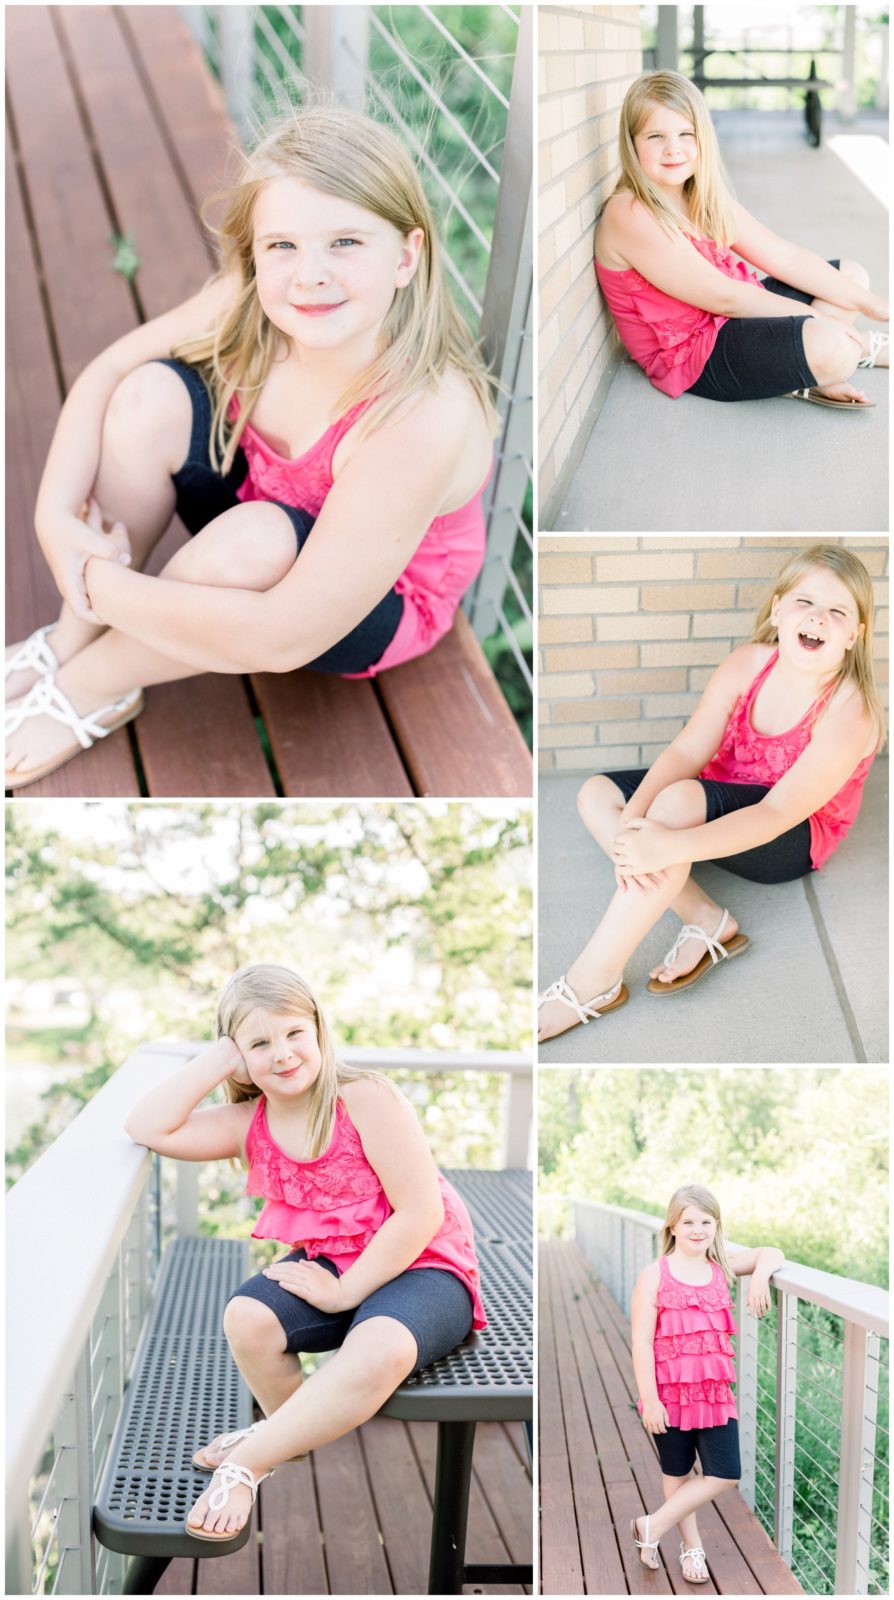 Chaska Photographer showing images of girl during Summer Session